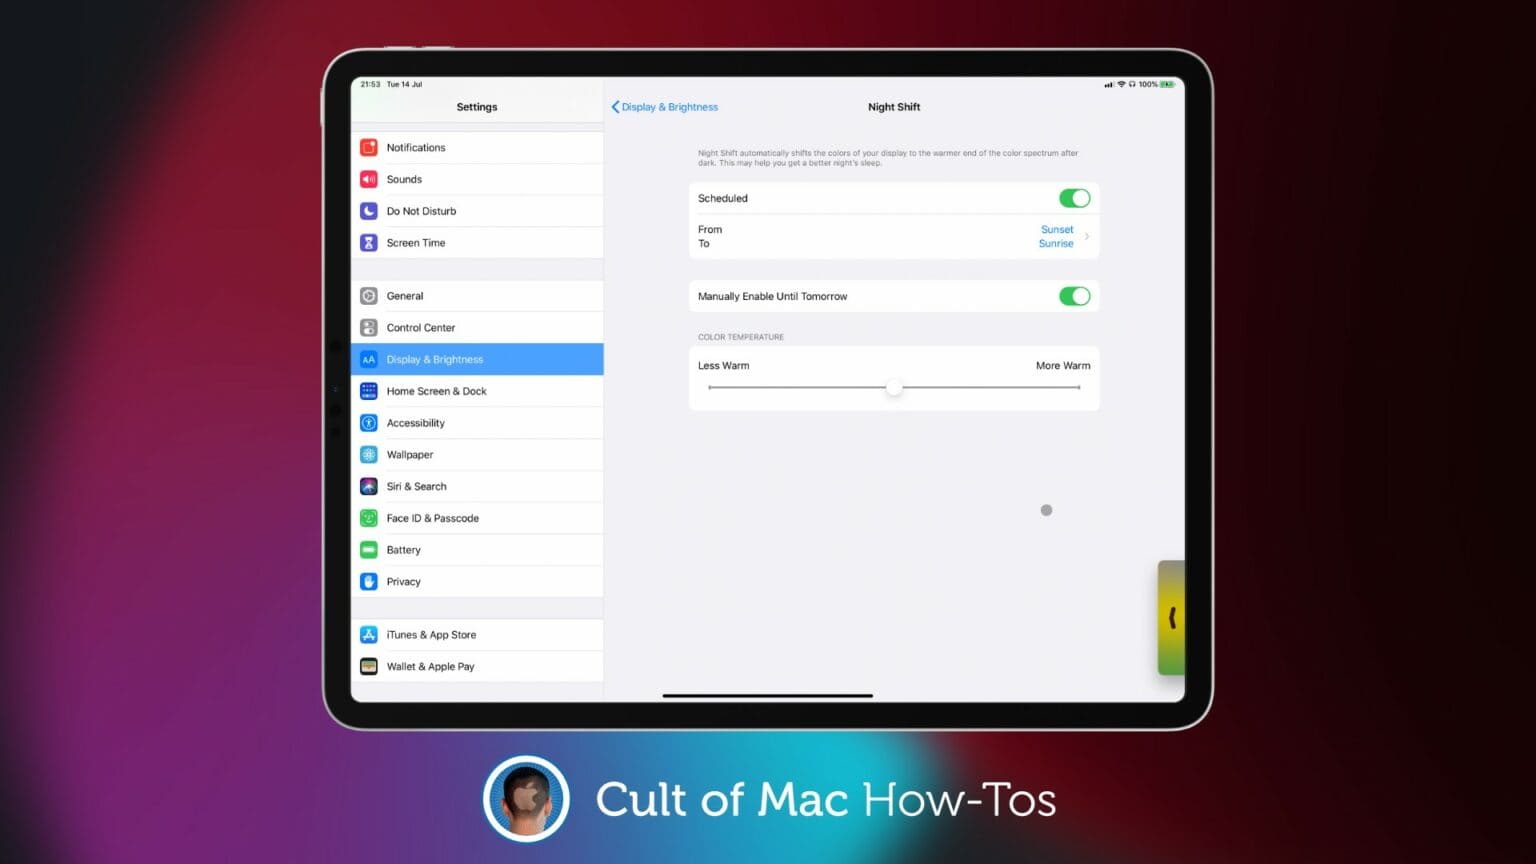 Fix Dark Mode, Night Shift scheduling on iPhone and iPad